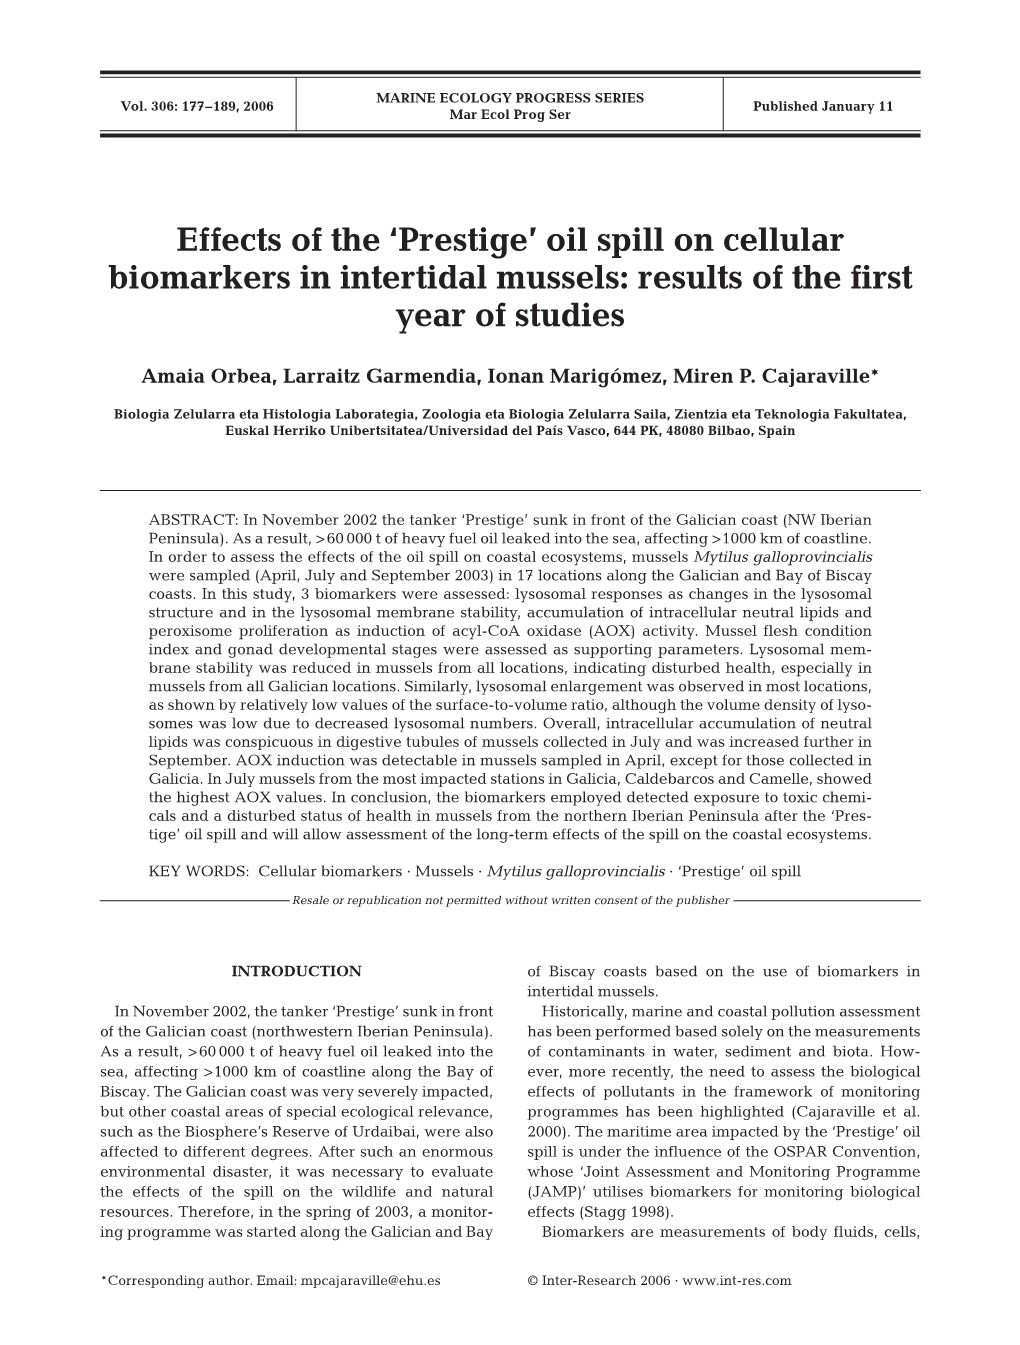 Effects of the 'Prestige' Oil Spill on Cellular Biomarkers in Intertidal Mussels